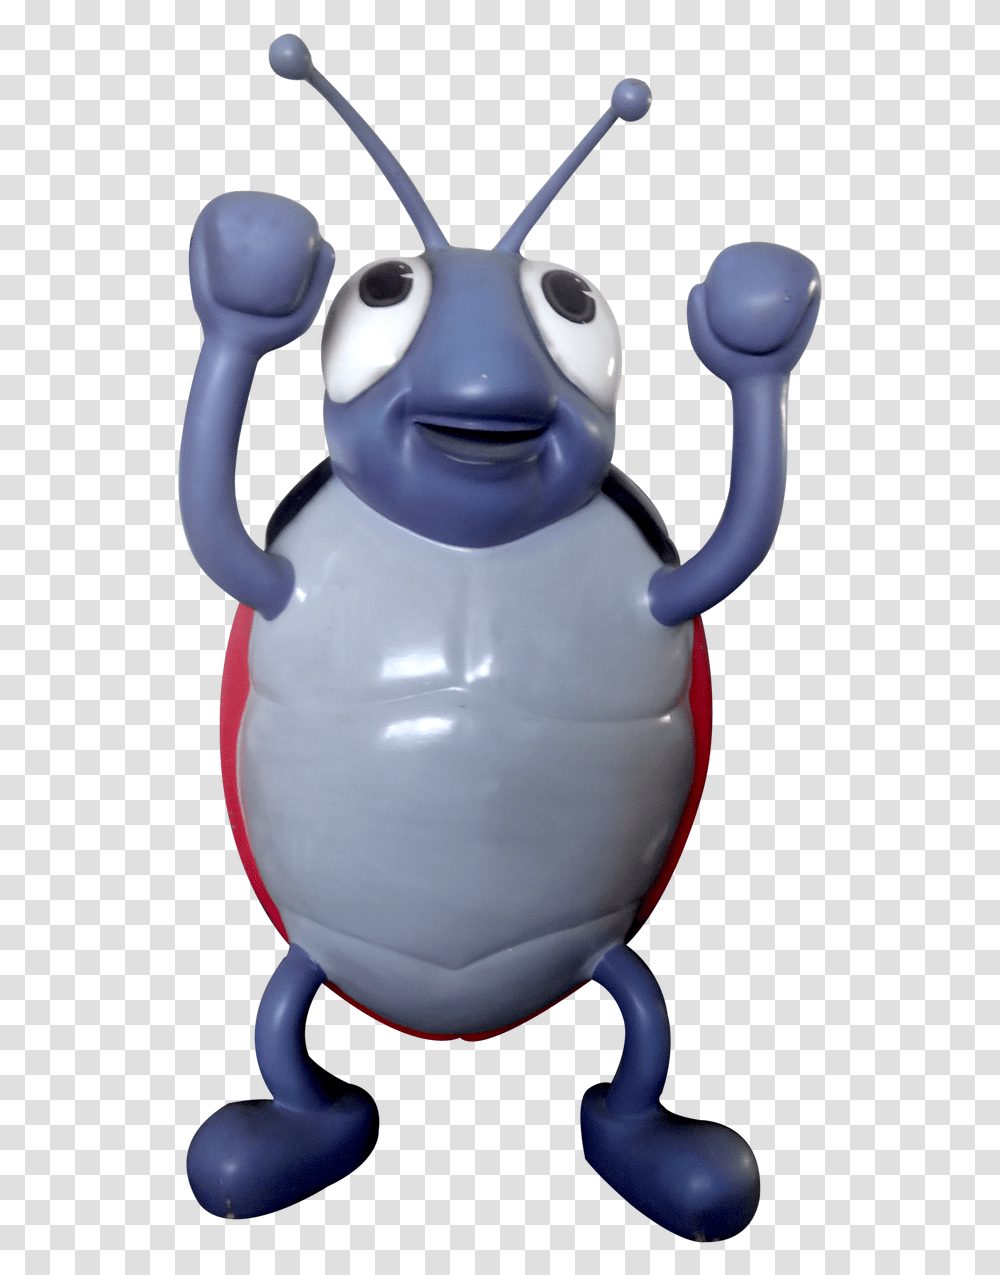 Beatle Bug, Toy, Figurine, Pottery, Mascot Transparent Png